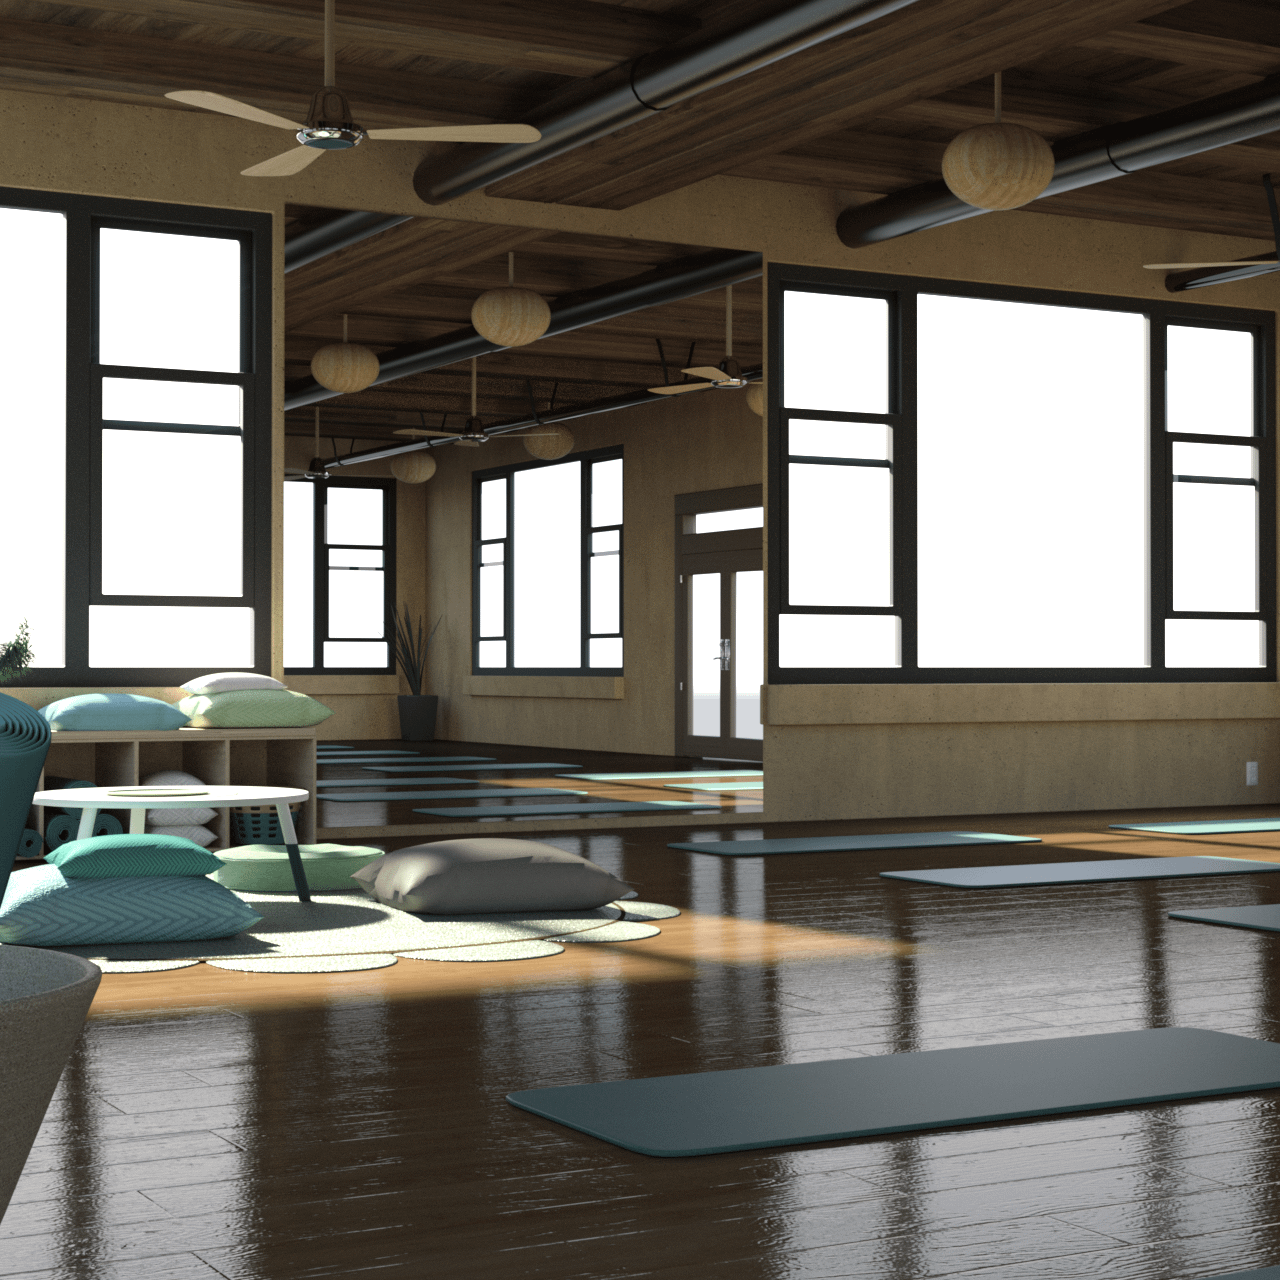 Yoga studio 3d model featuring mats, seating shelf, rug and pollows